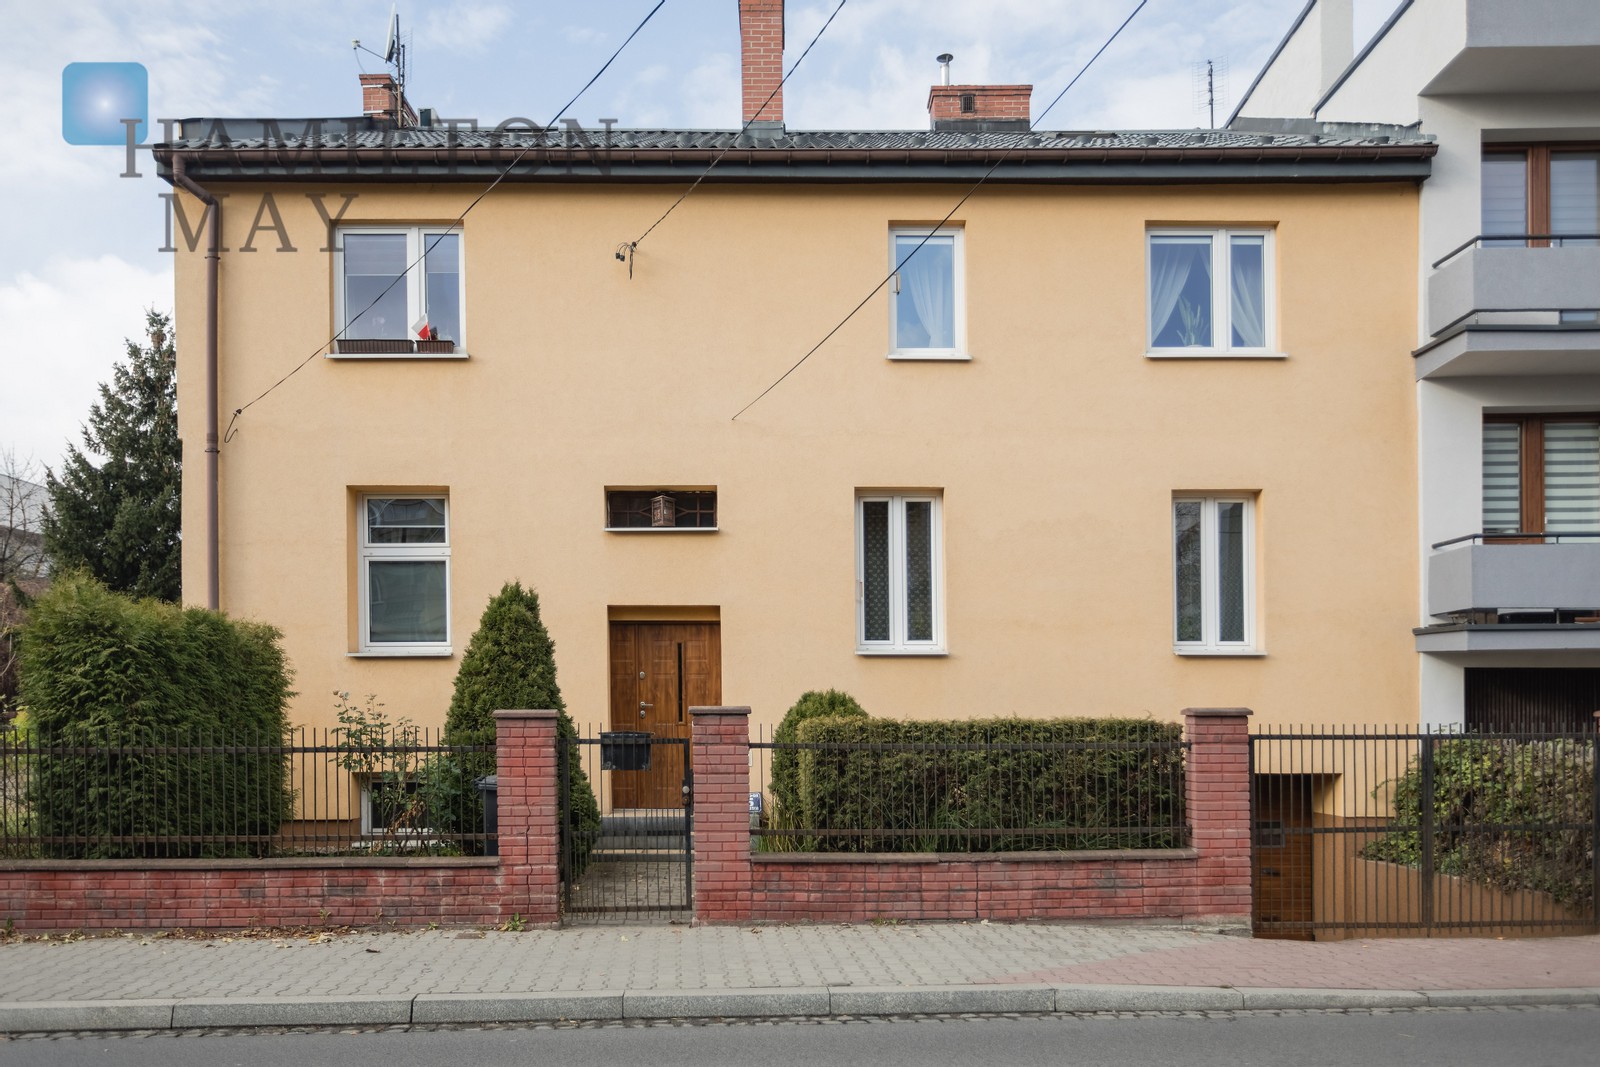 Apartments with a total area of 166 m2 with a garden, in a multi-family building in Olsza Krakow for sale